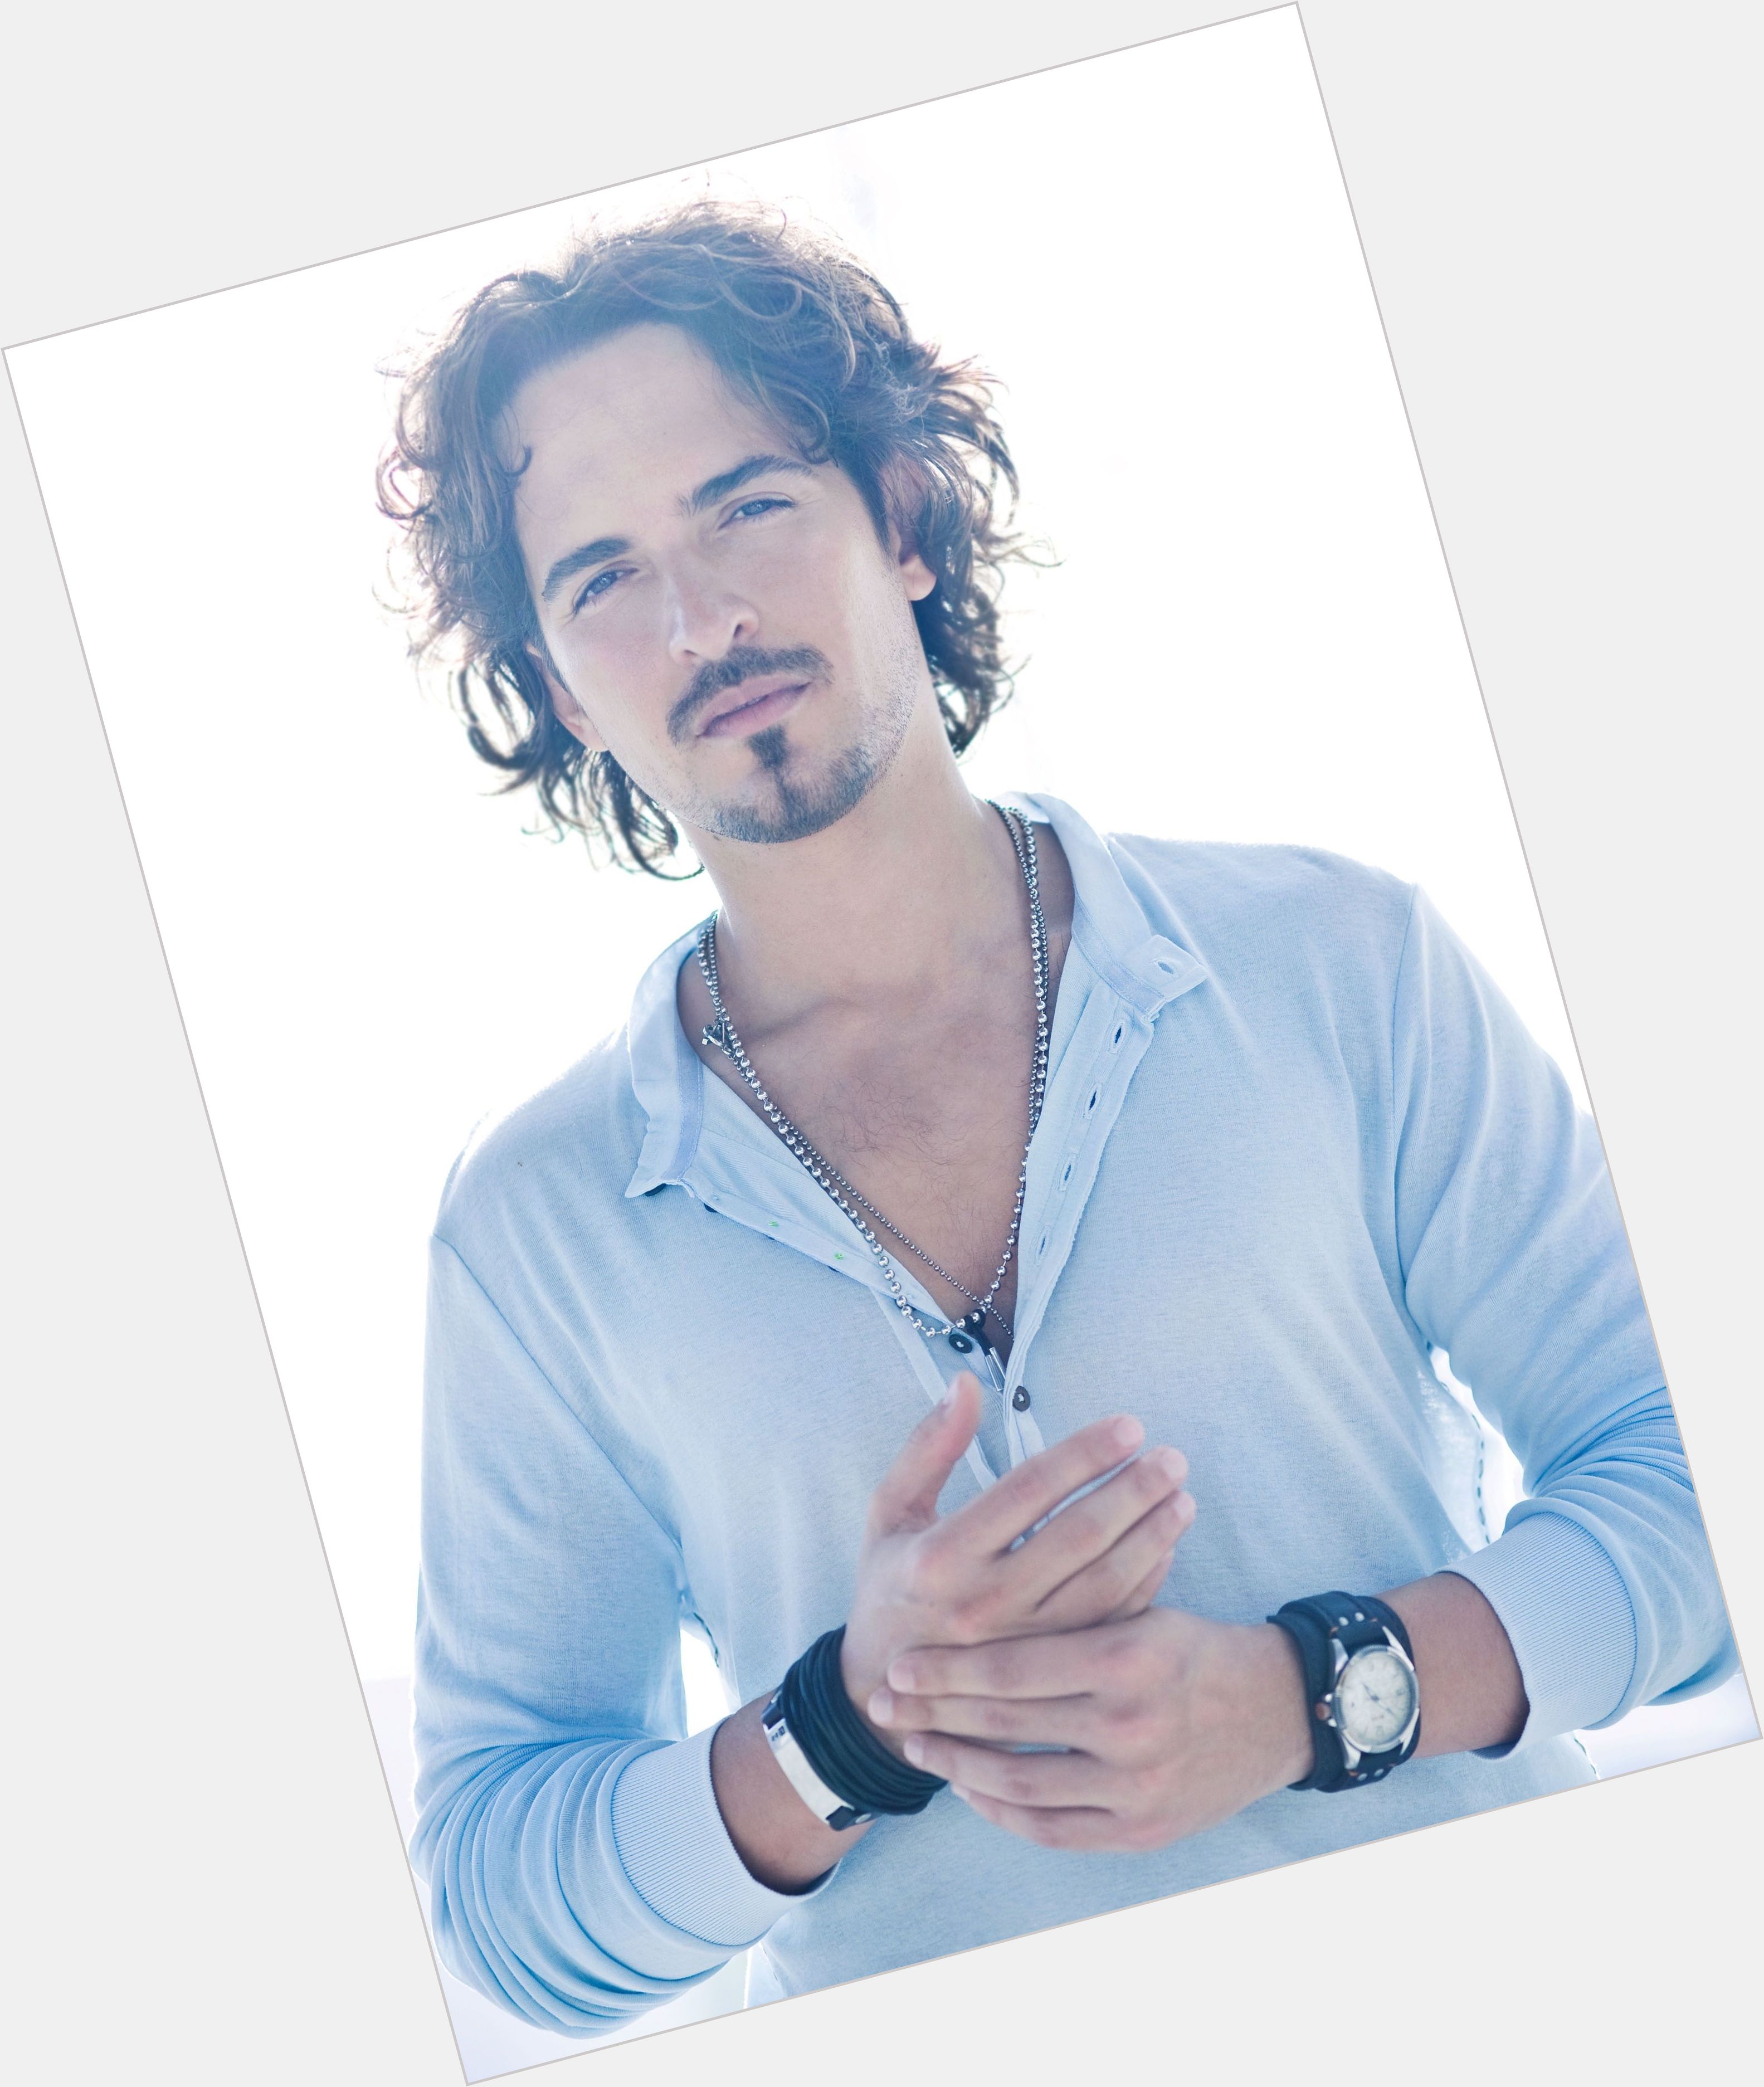 Http://fanpagepress.net/m/T/Tommy Torres Dating 2